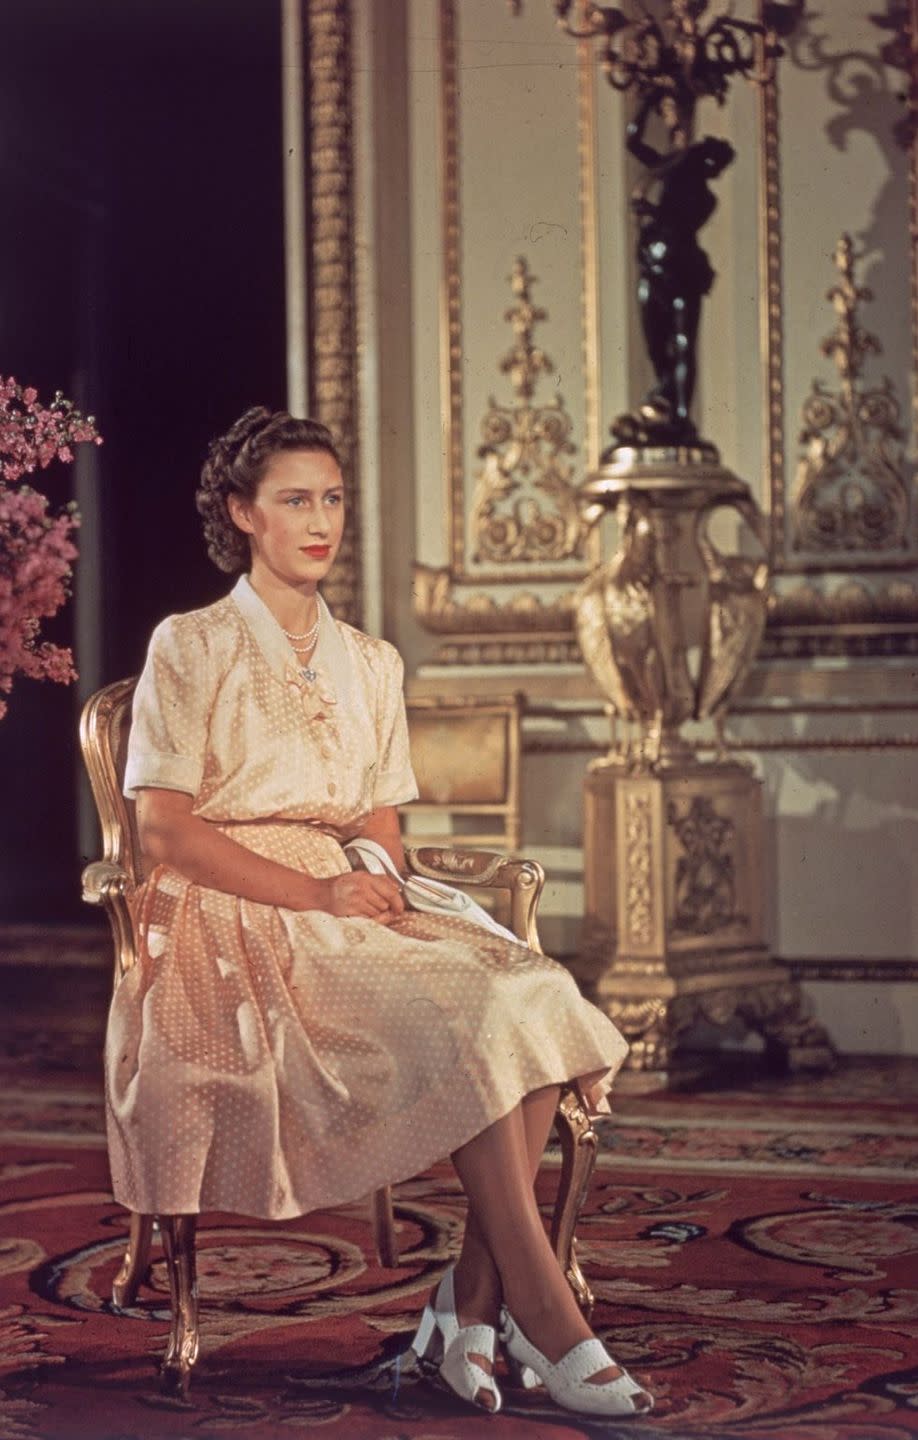 <p>Princess Margaret Rose at Buckingham Palace on her 17th birthday, August 20, 1947. </p>